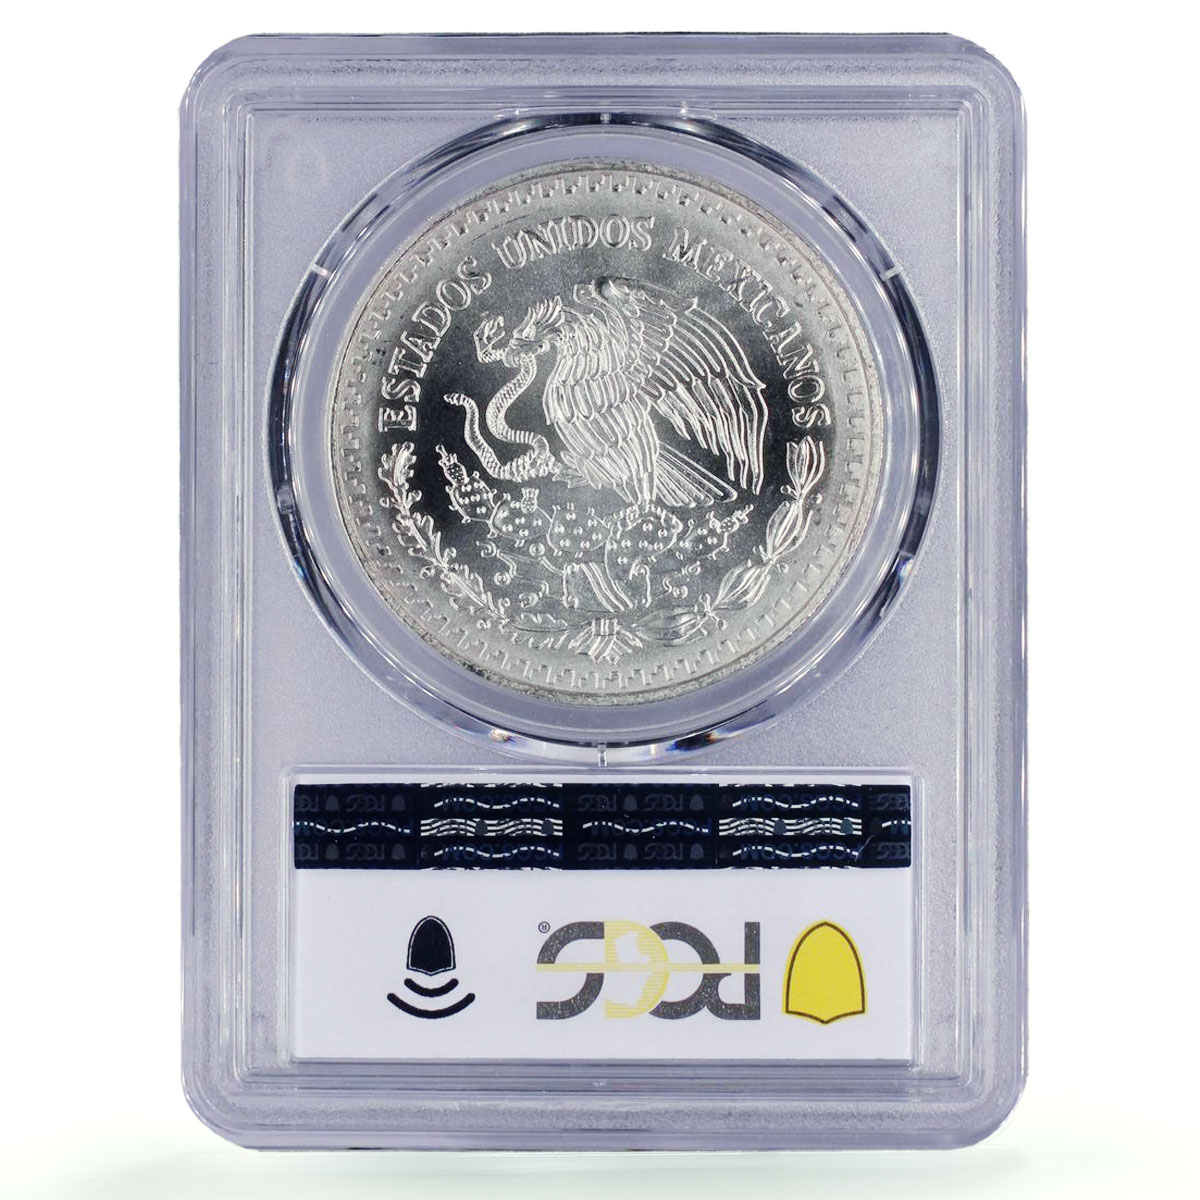 Mexico 1 onza Libertad Angel of Independence MS69 PCGS silver coin 1998